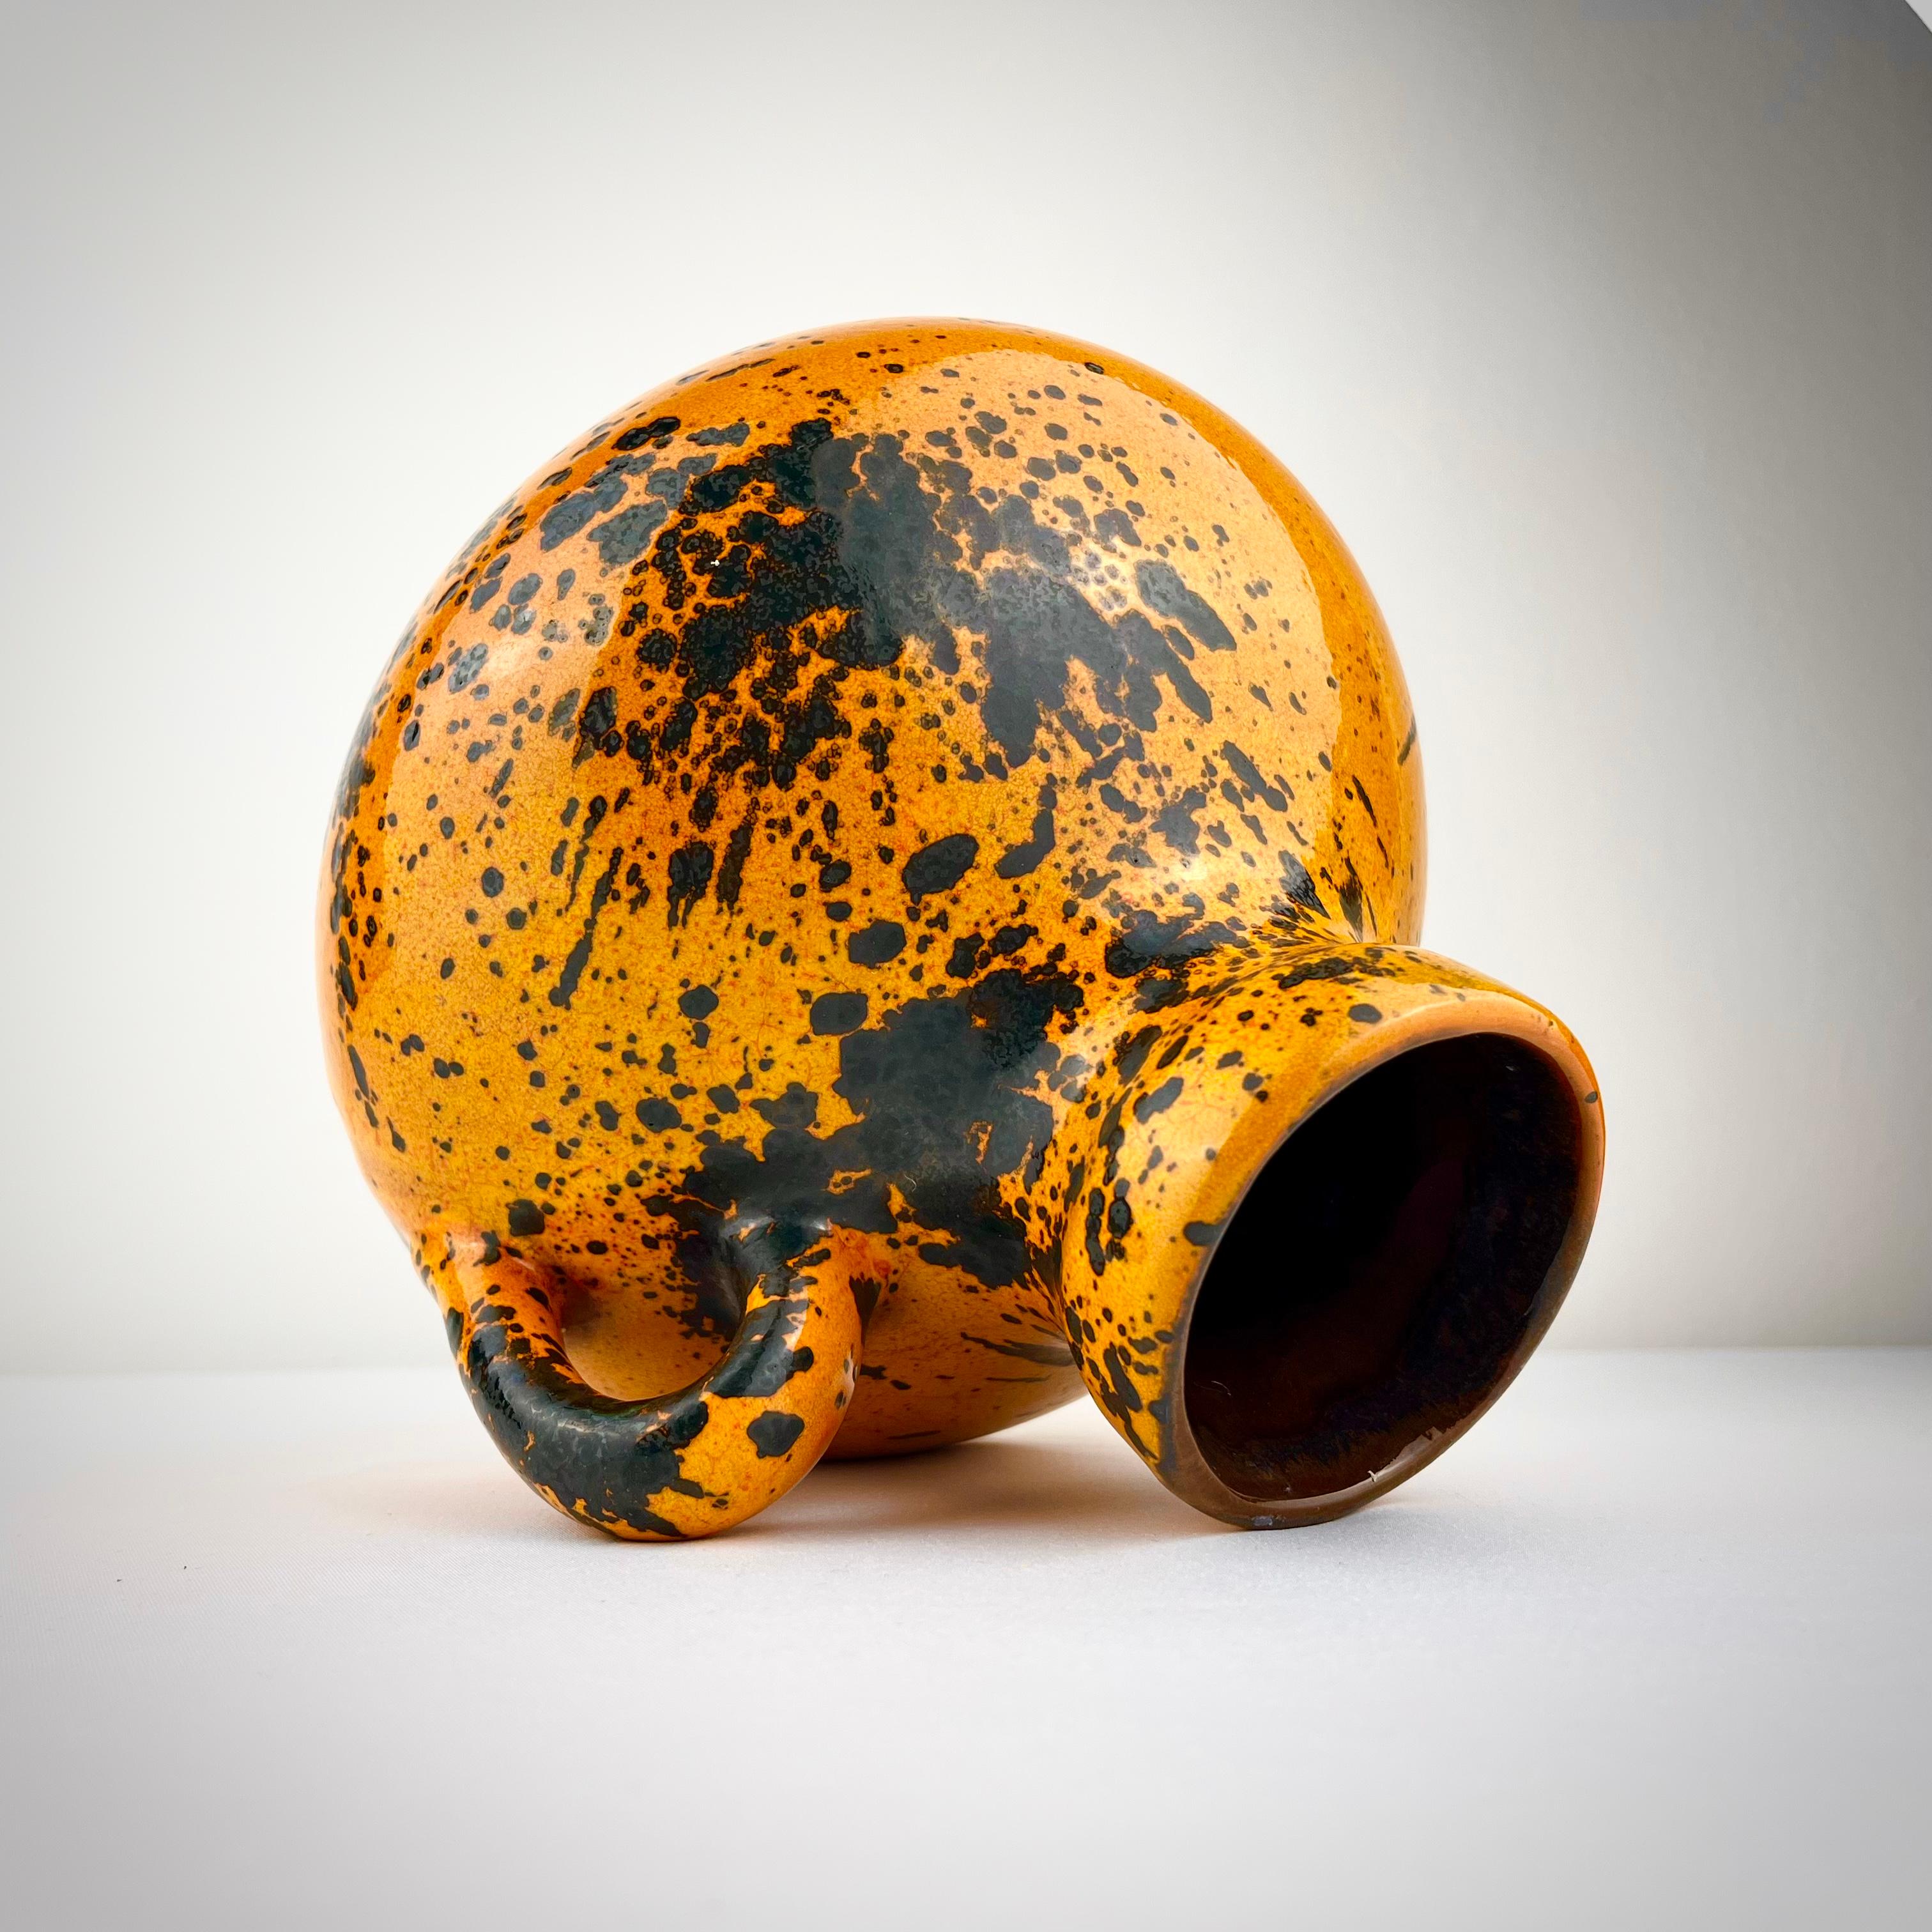 A large and vibrant Marei Keramik jug-vase, West Germany 1960s.
Form number 4302 in a rare yellow / orange and black graffiti splatter pop art glaze!
A really stylish and collectible vase in excellent condition with no chips, no cracks, no